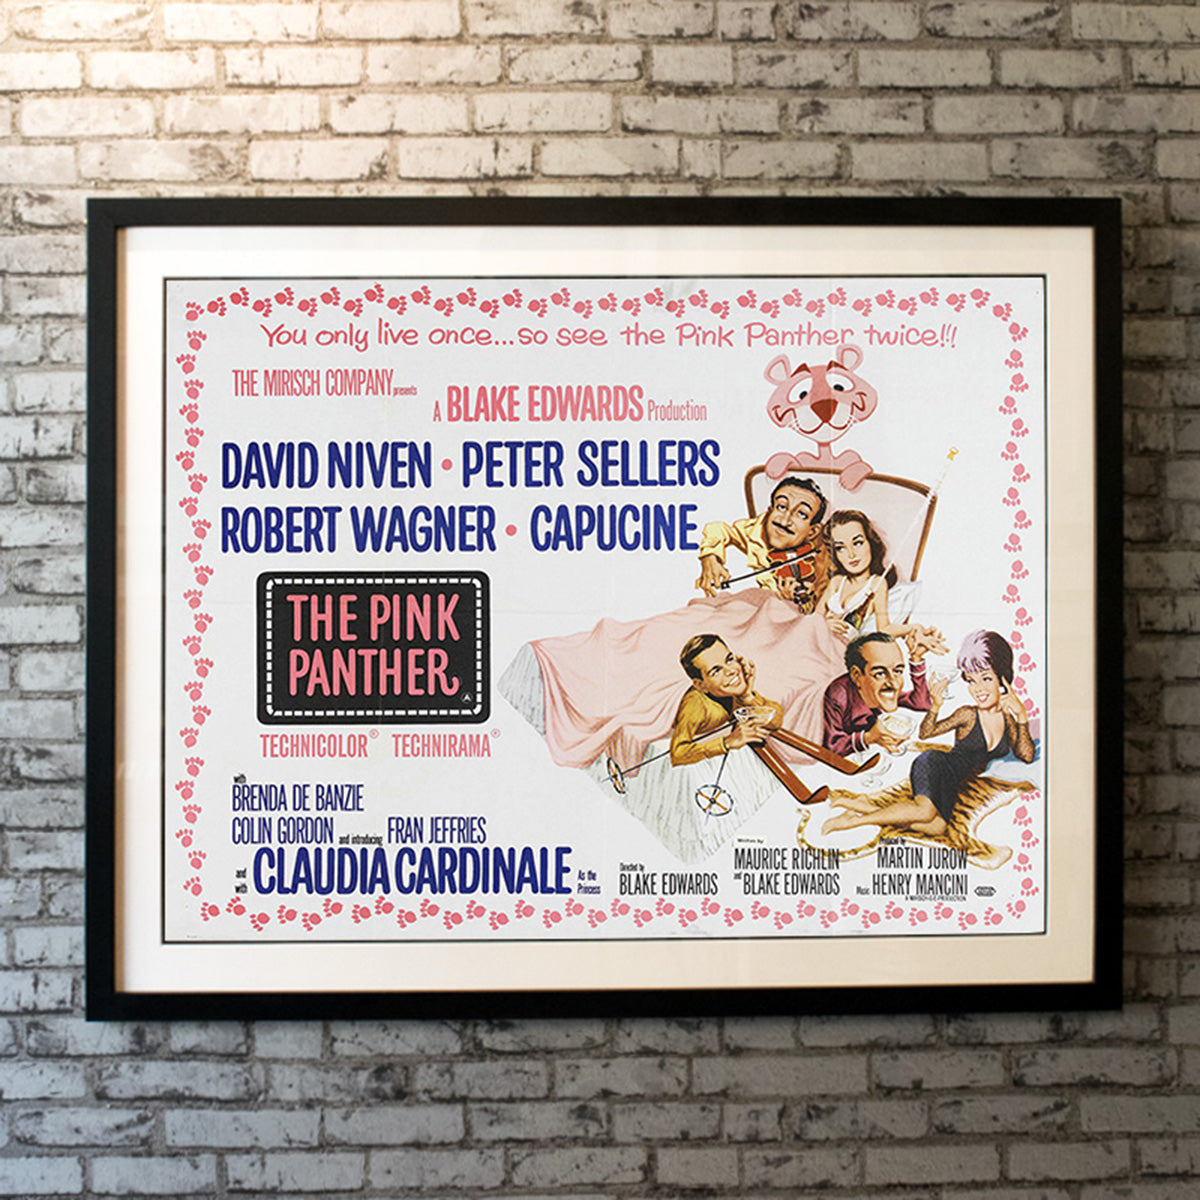 Original Movie Poster of Pink Panther, The (1963)